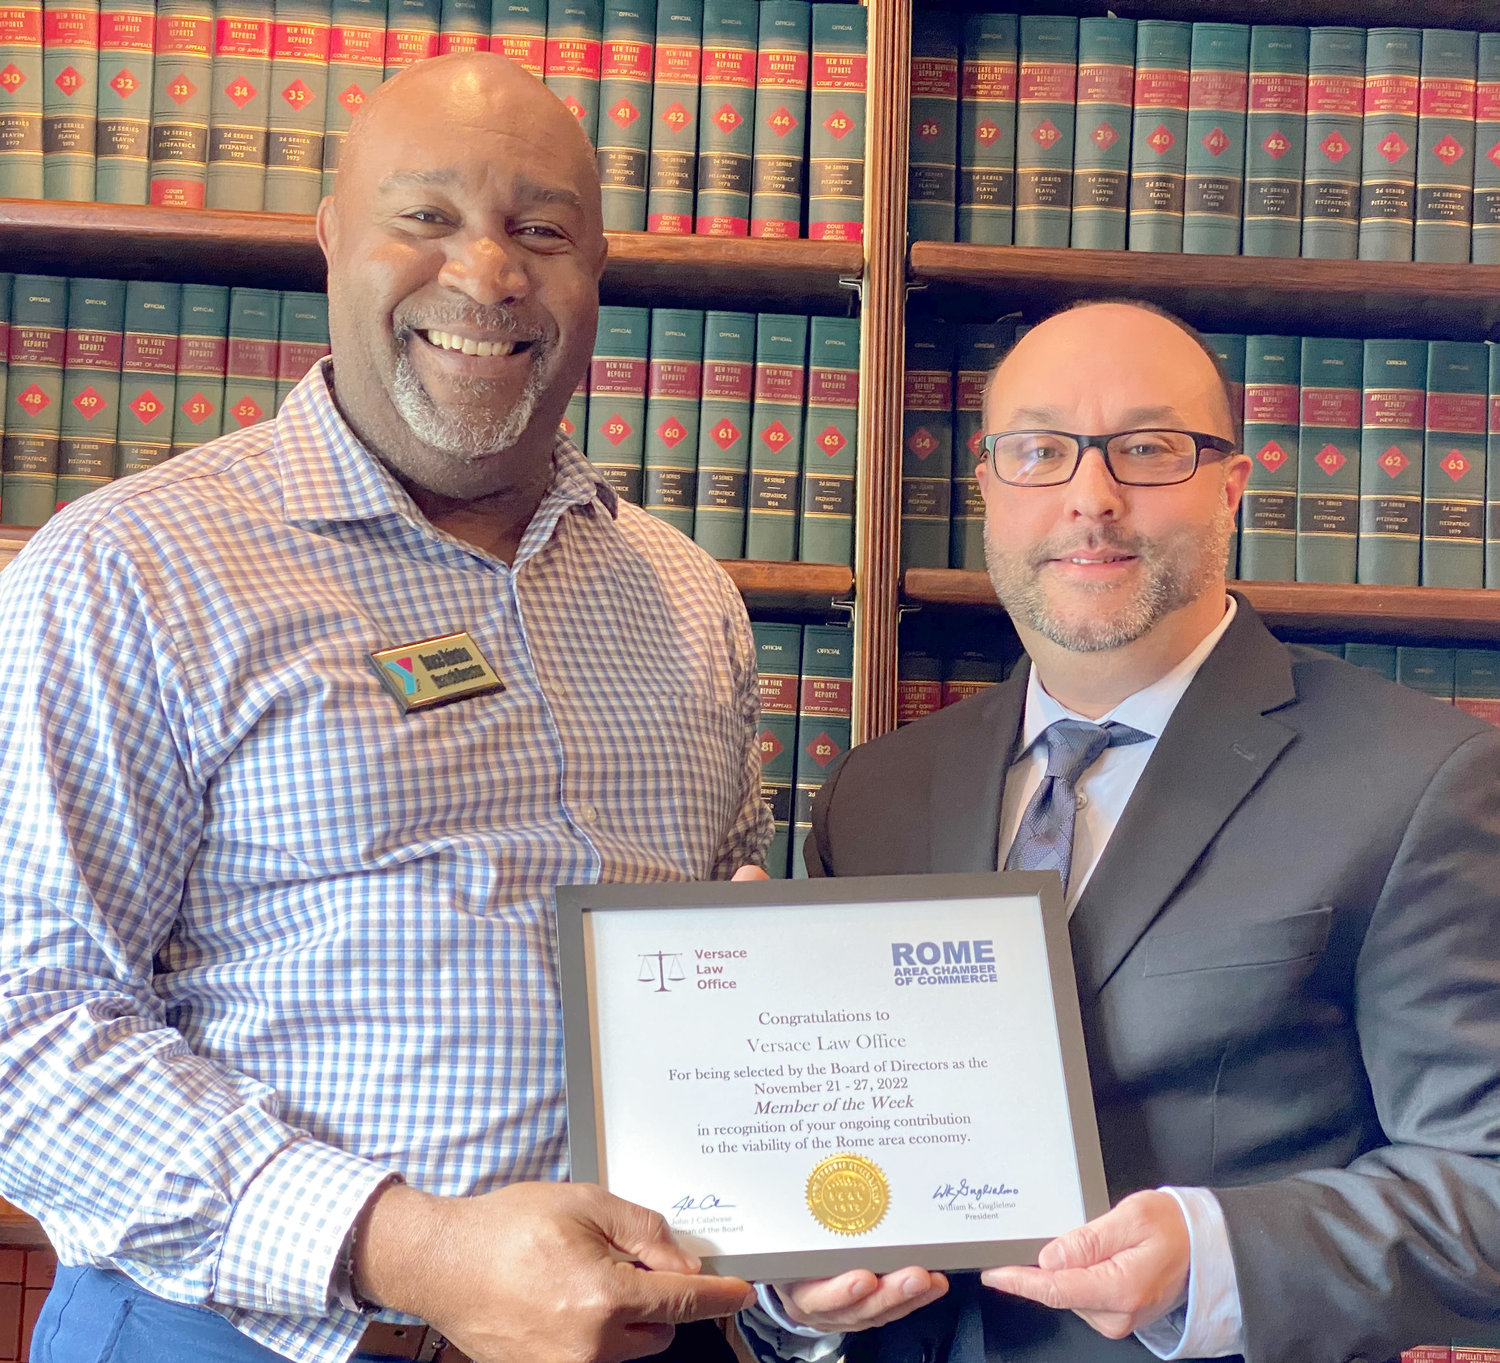 Pictured left to right: Bruce Hairston, member of the Chamber’s Membership Committee, presenting the congratulatory certificate to Meade H. Versace, Esq.